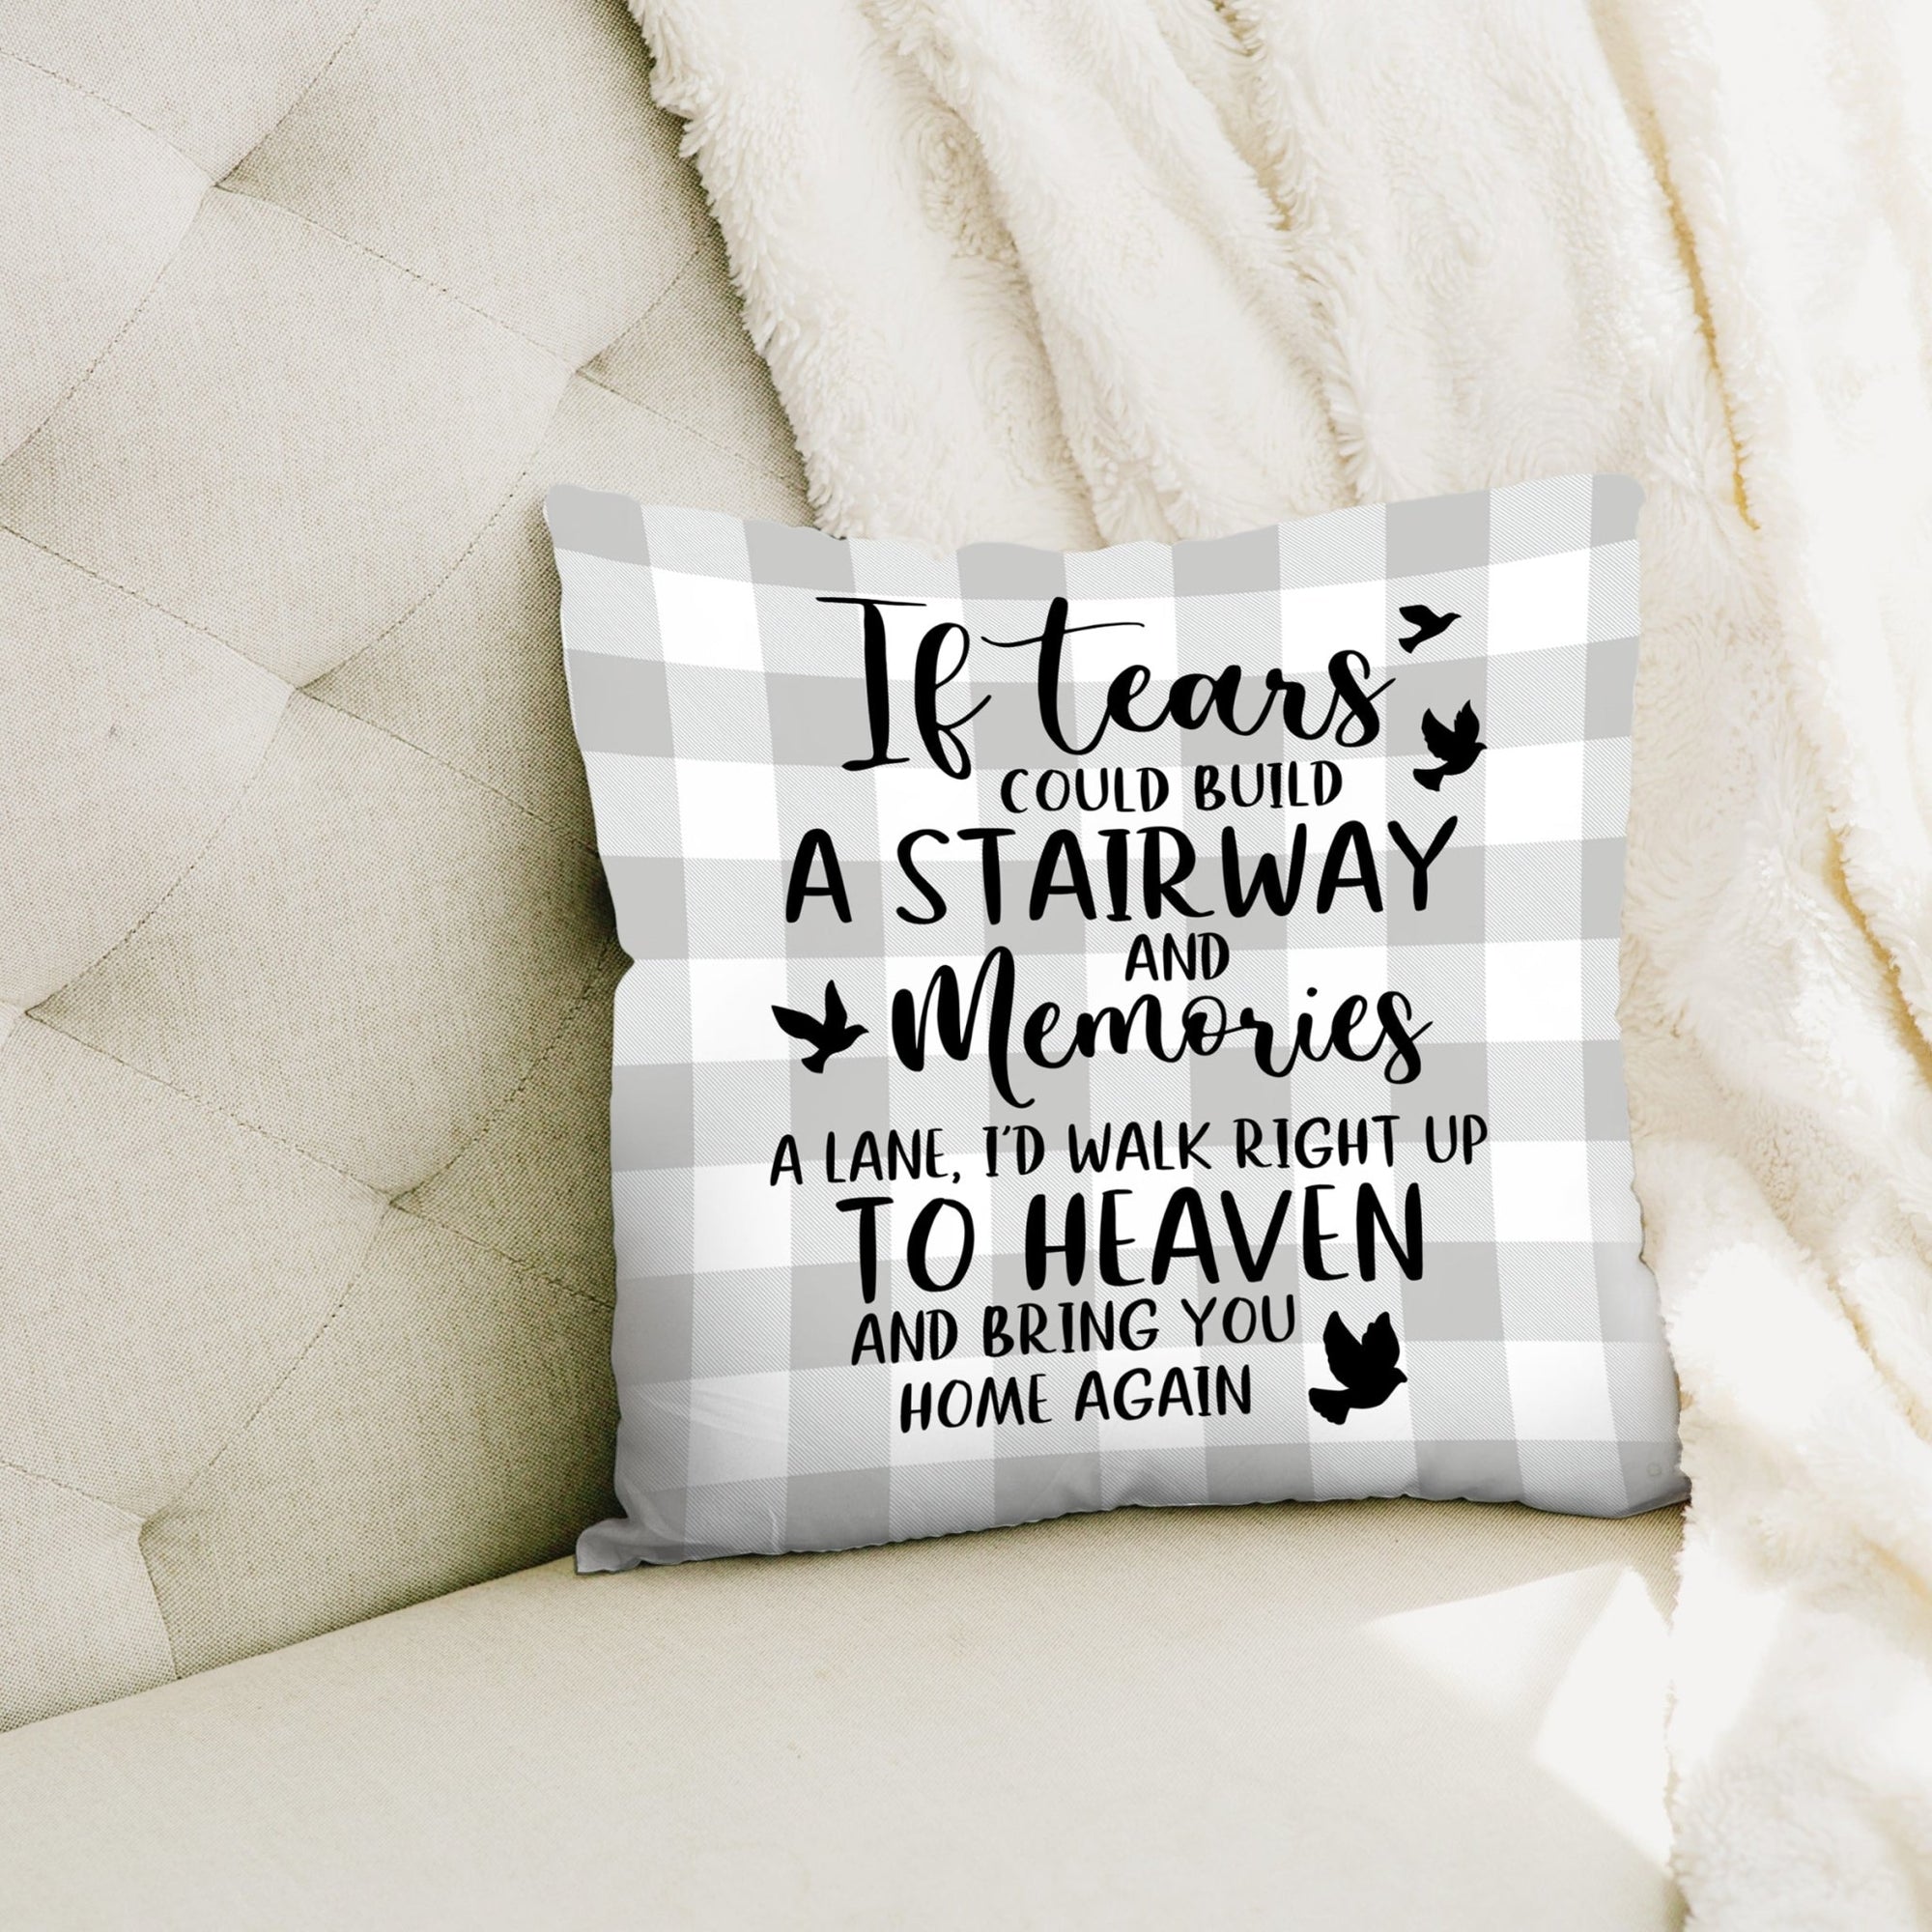 If Tears Could Build a Stairway to Heaven - Memorial White Decorative Throw Pillow For Home Décor Ideas - LifeSong Milestones